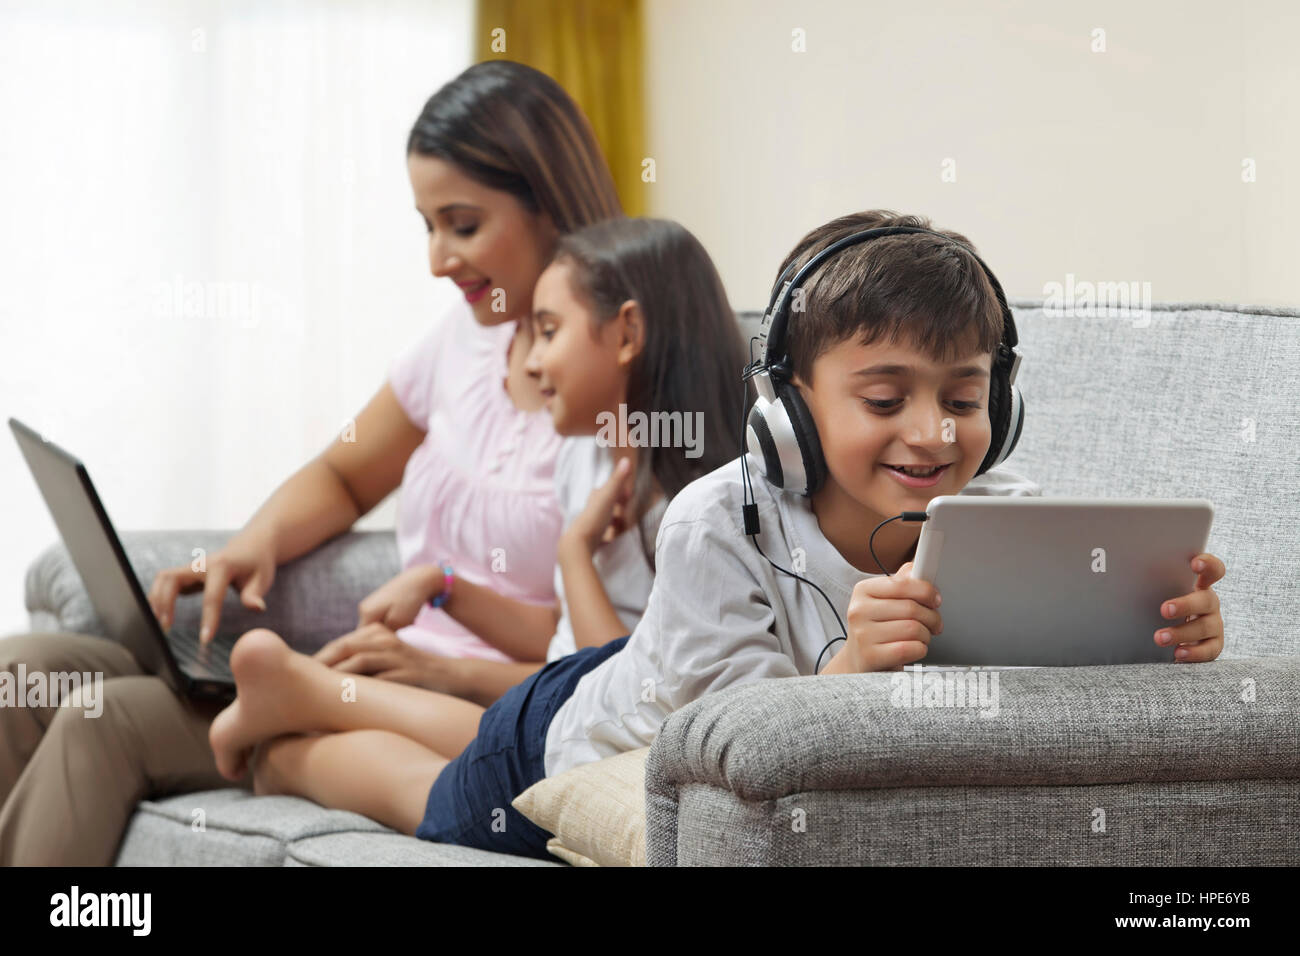 Focused boy using digital tablet headphones with mother and sister using laptop in background Stock Photo